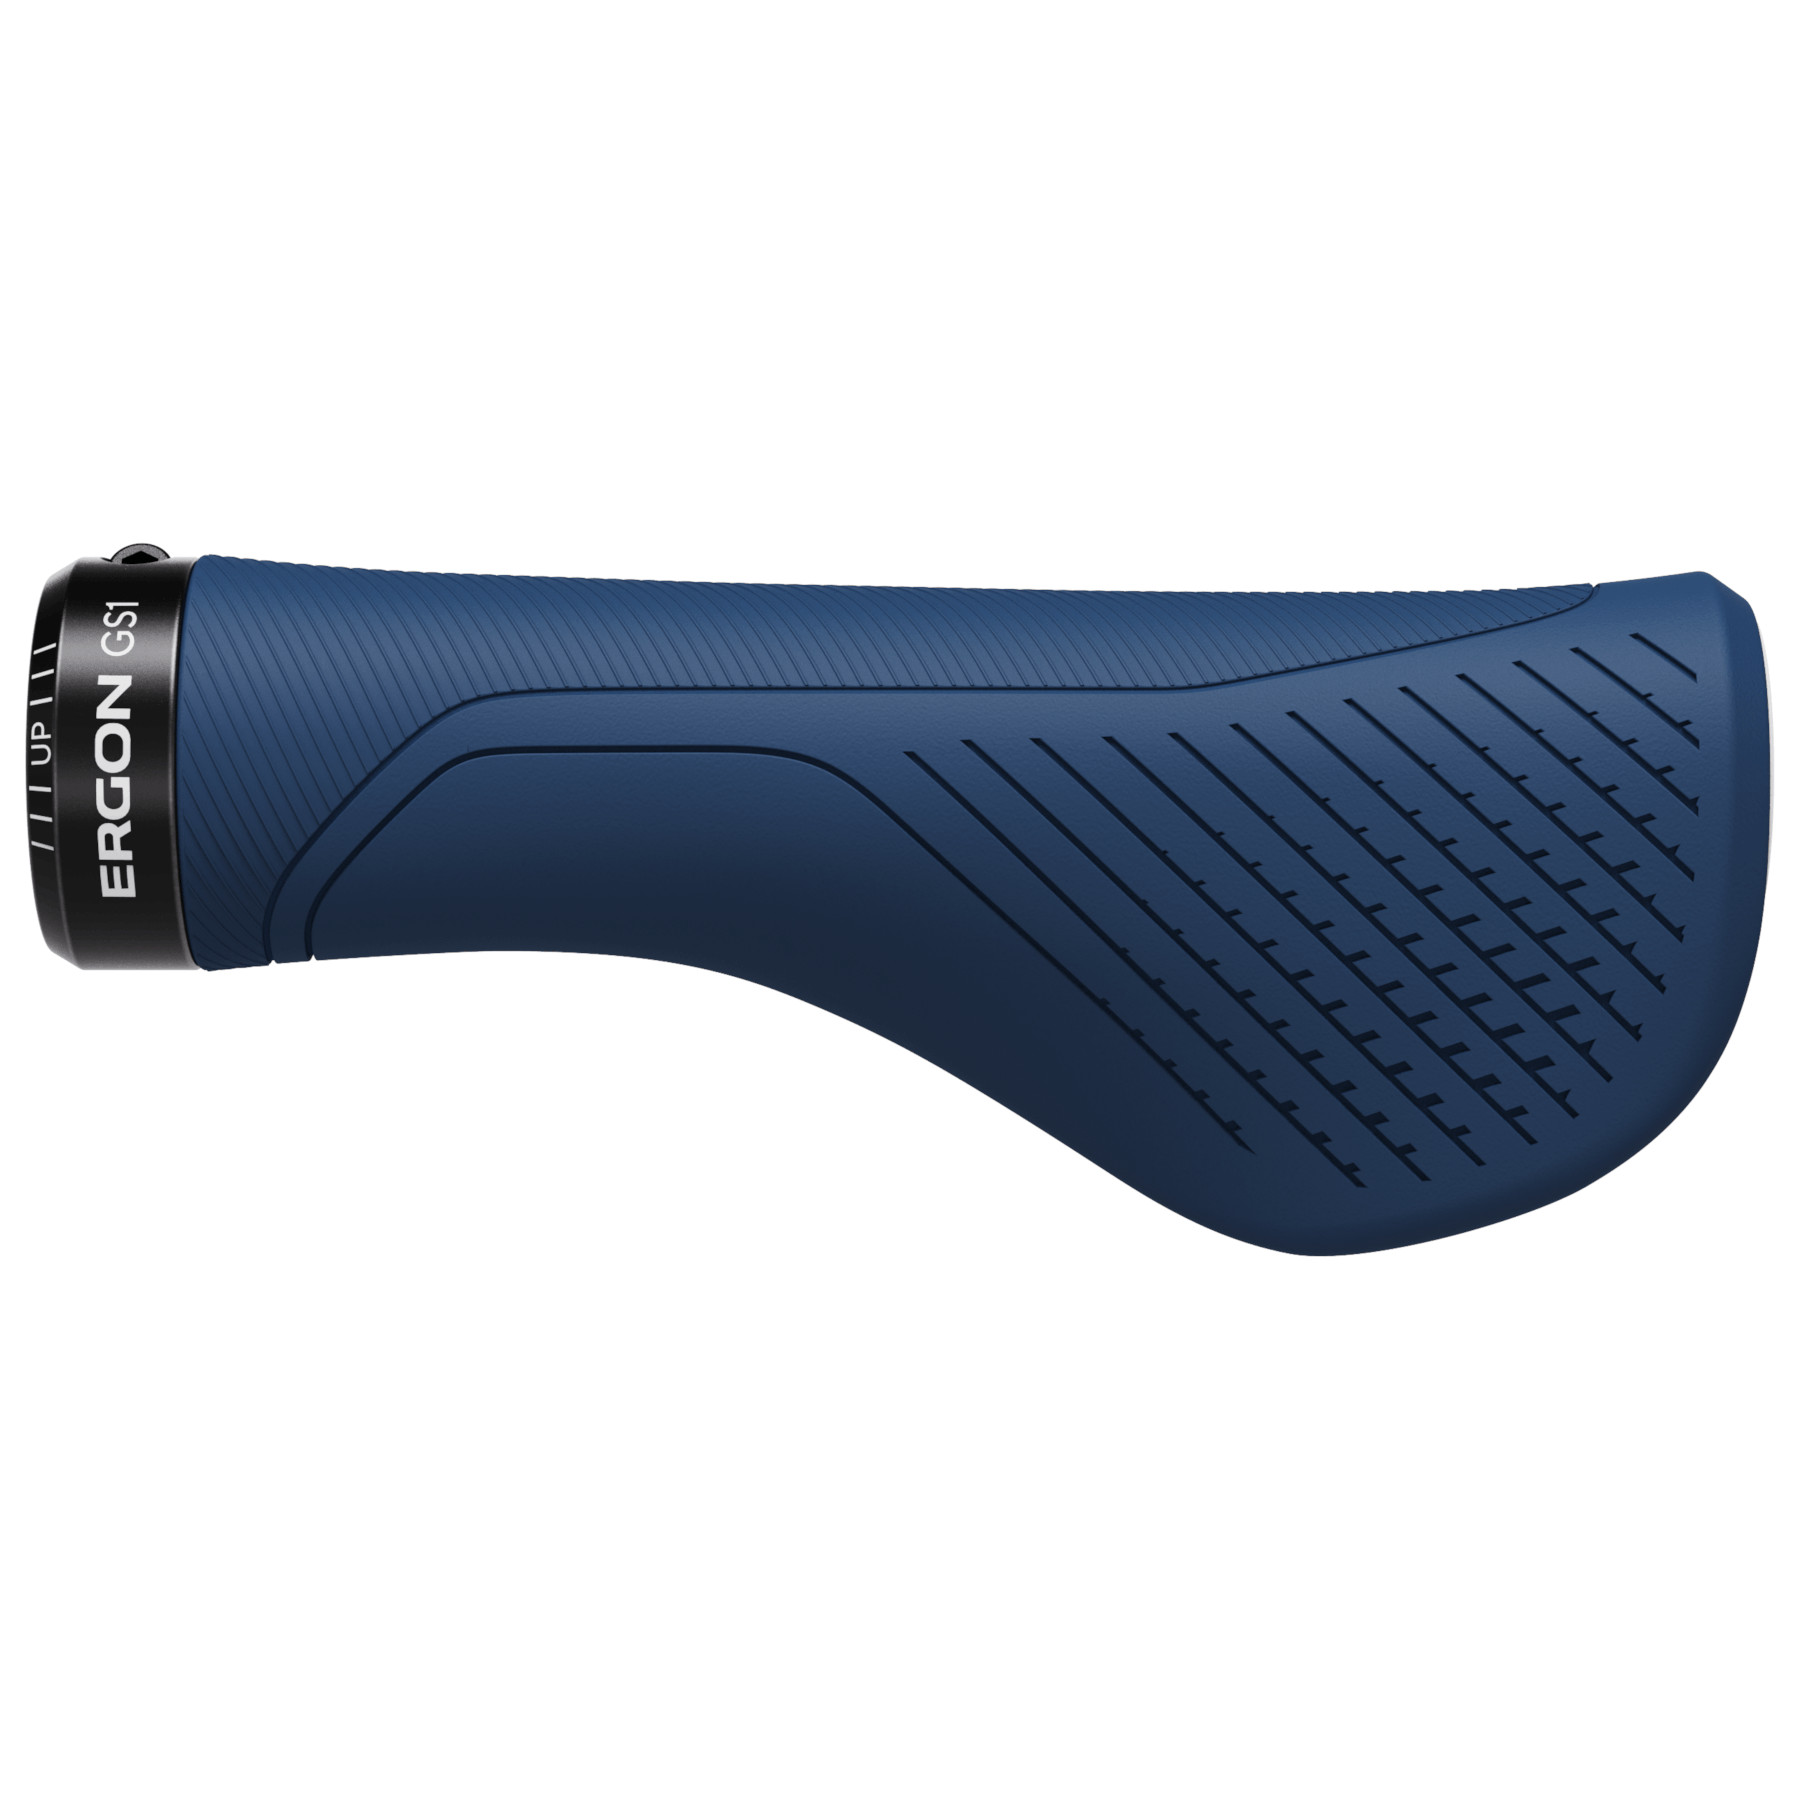 Picture of Ergon GS1 Evo Large Bar Grips - blue